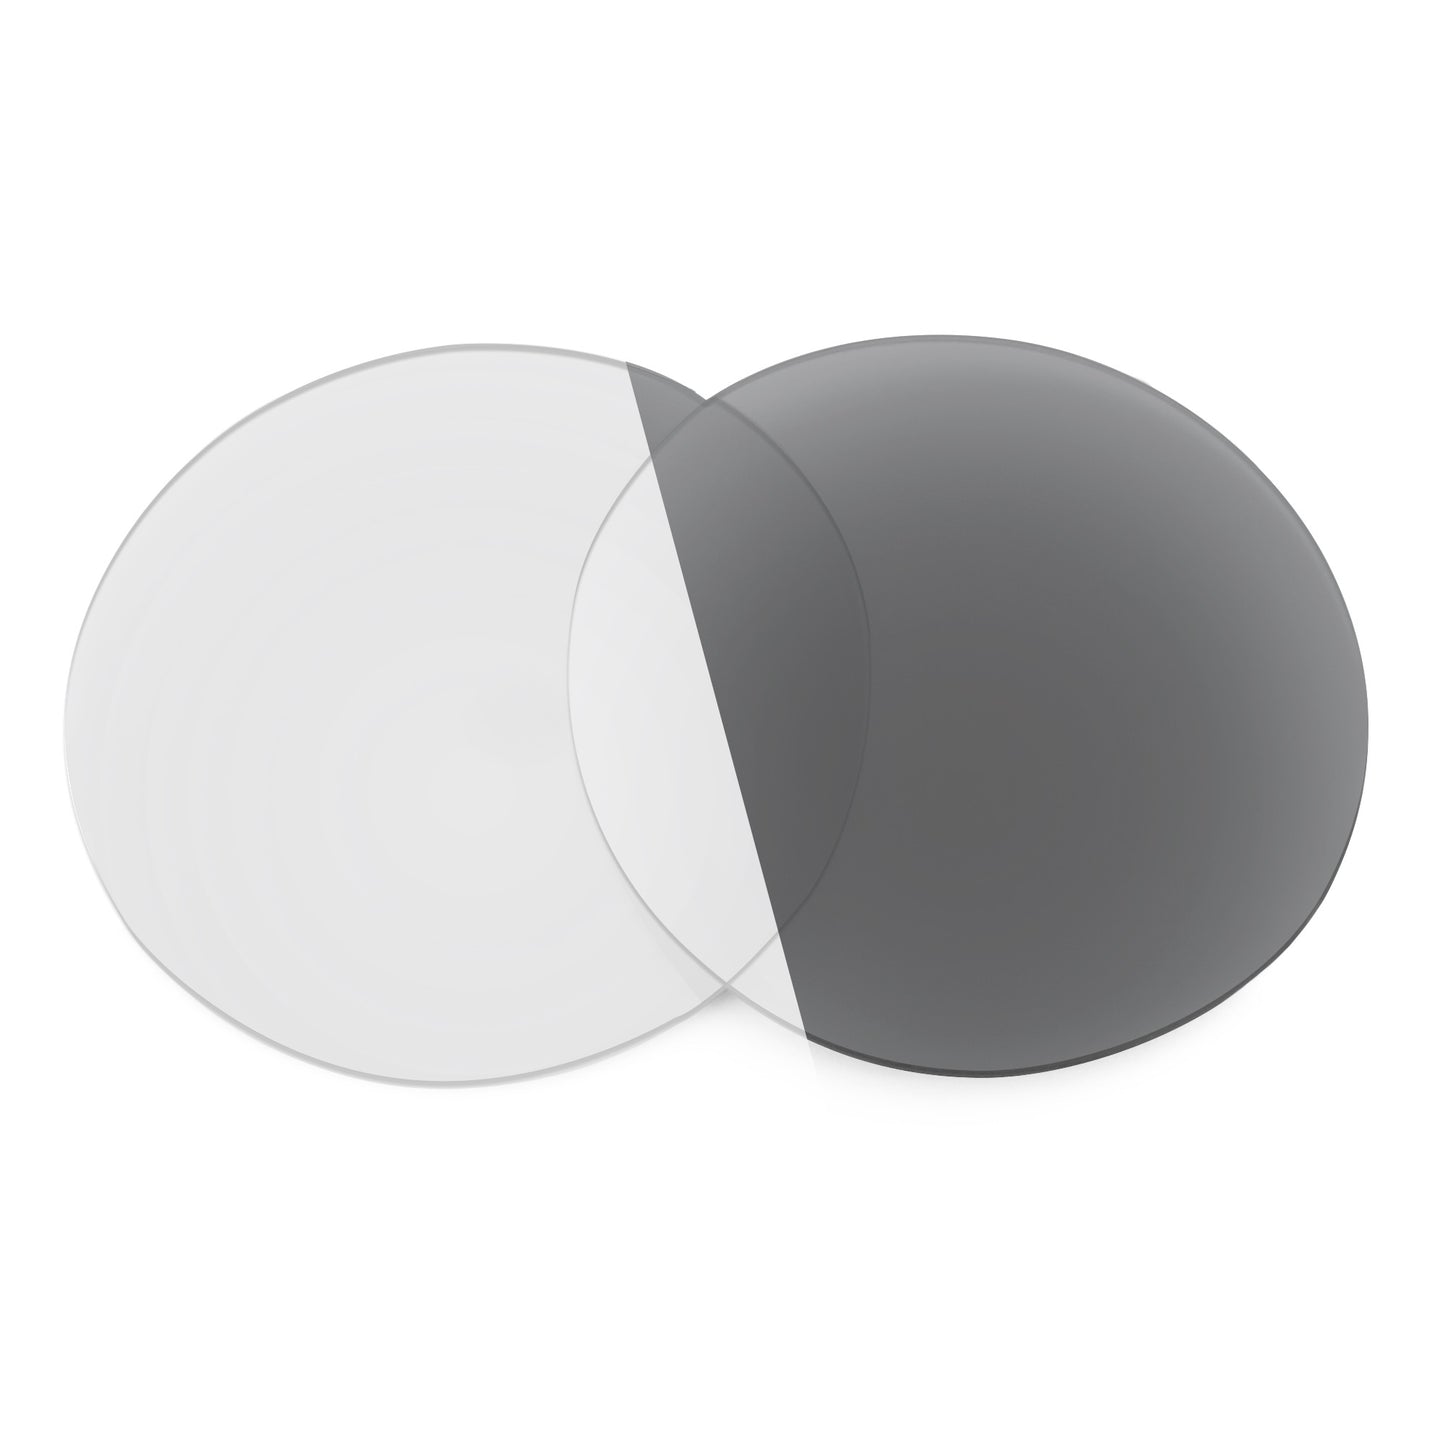 Revant replacement lenses for Ray-Ban Jack RB3565 51mm Non-Polarized Adapt Gray Photochromic